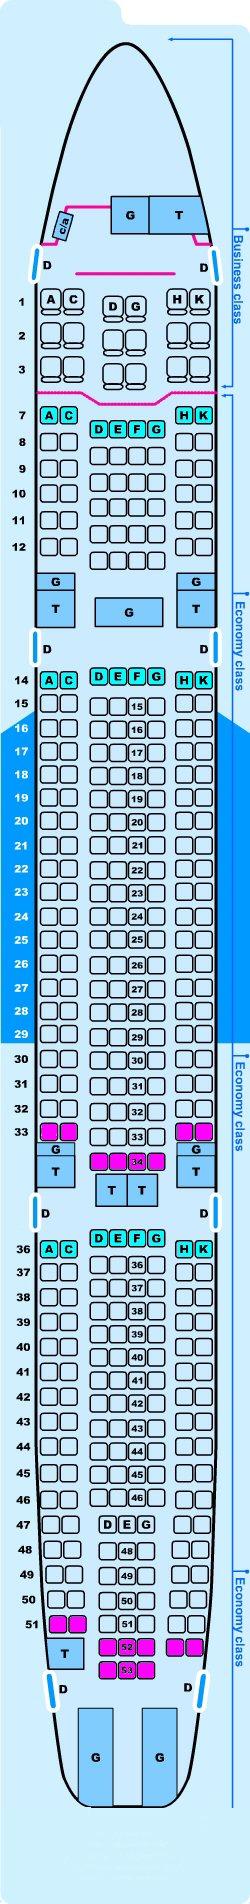 Seat map for Airbus A330 300